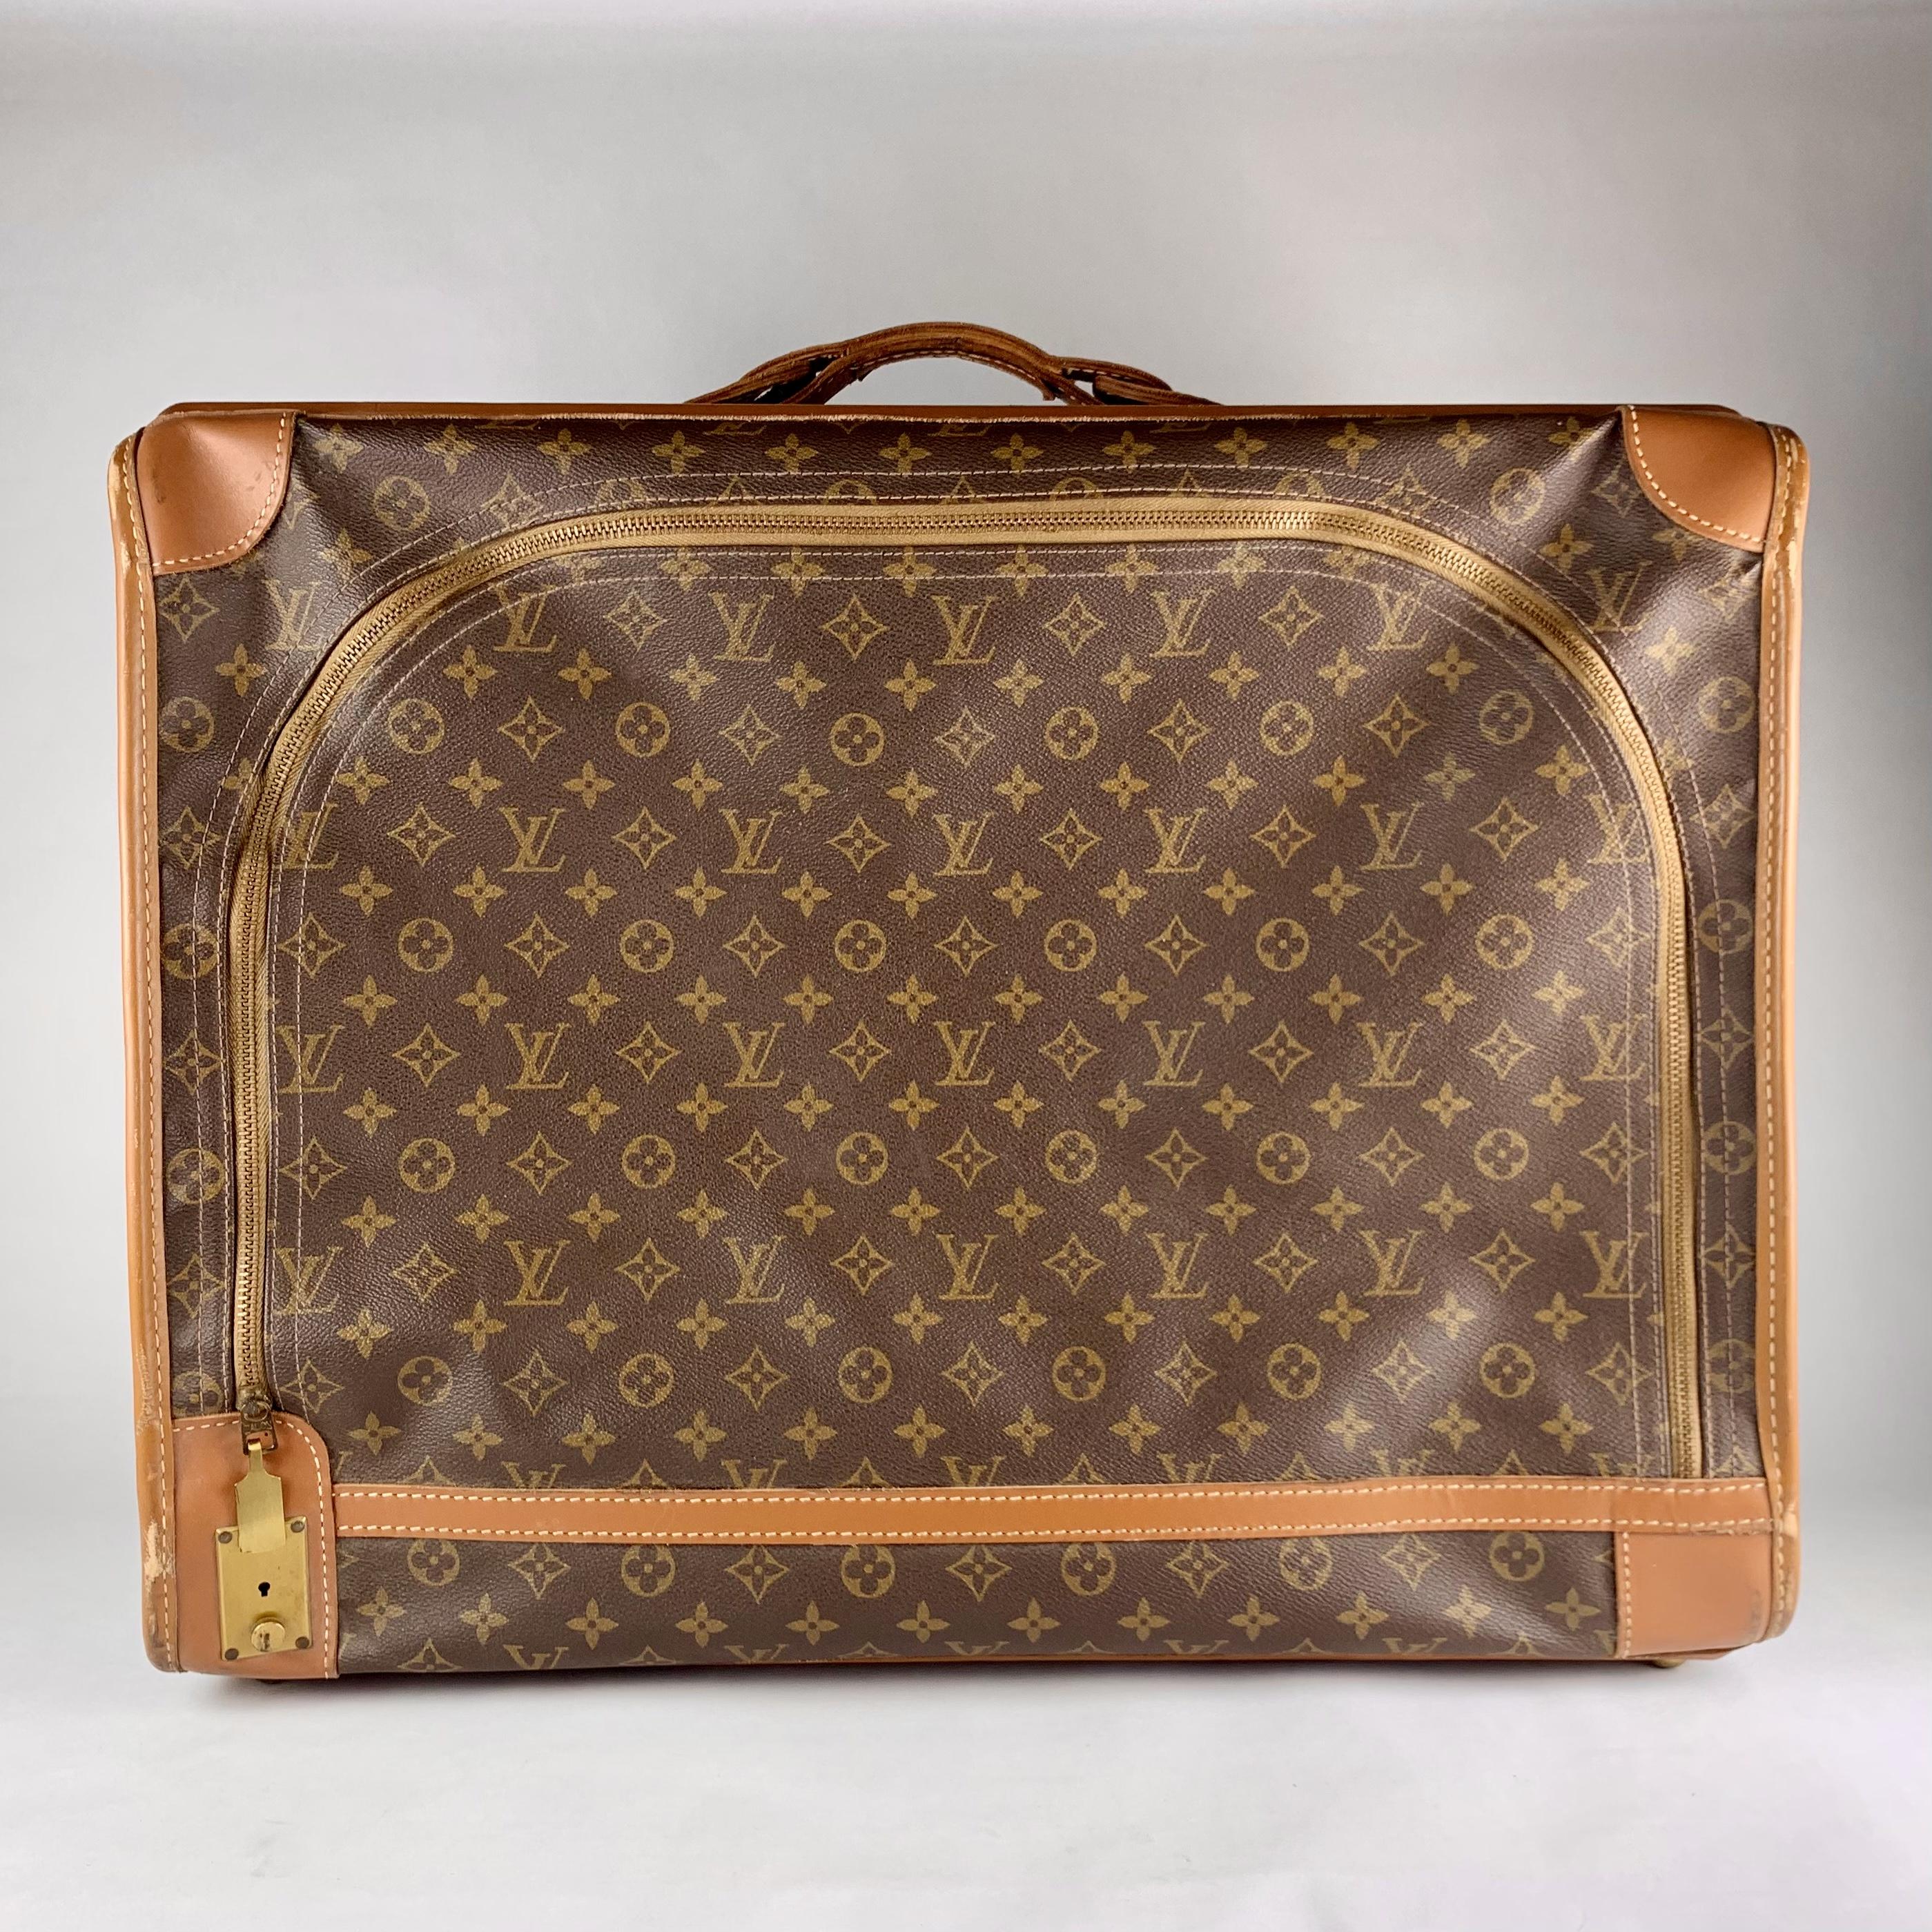 Louis Vuitton: how did the suitcase empire turn into wearable luxe